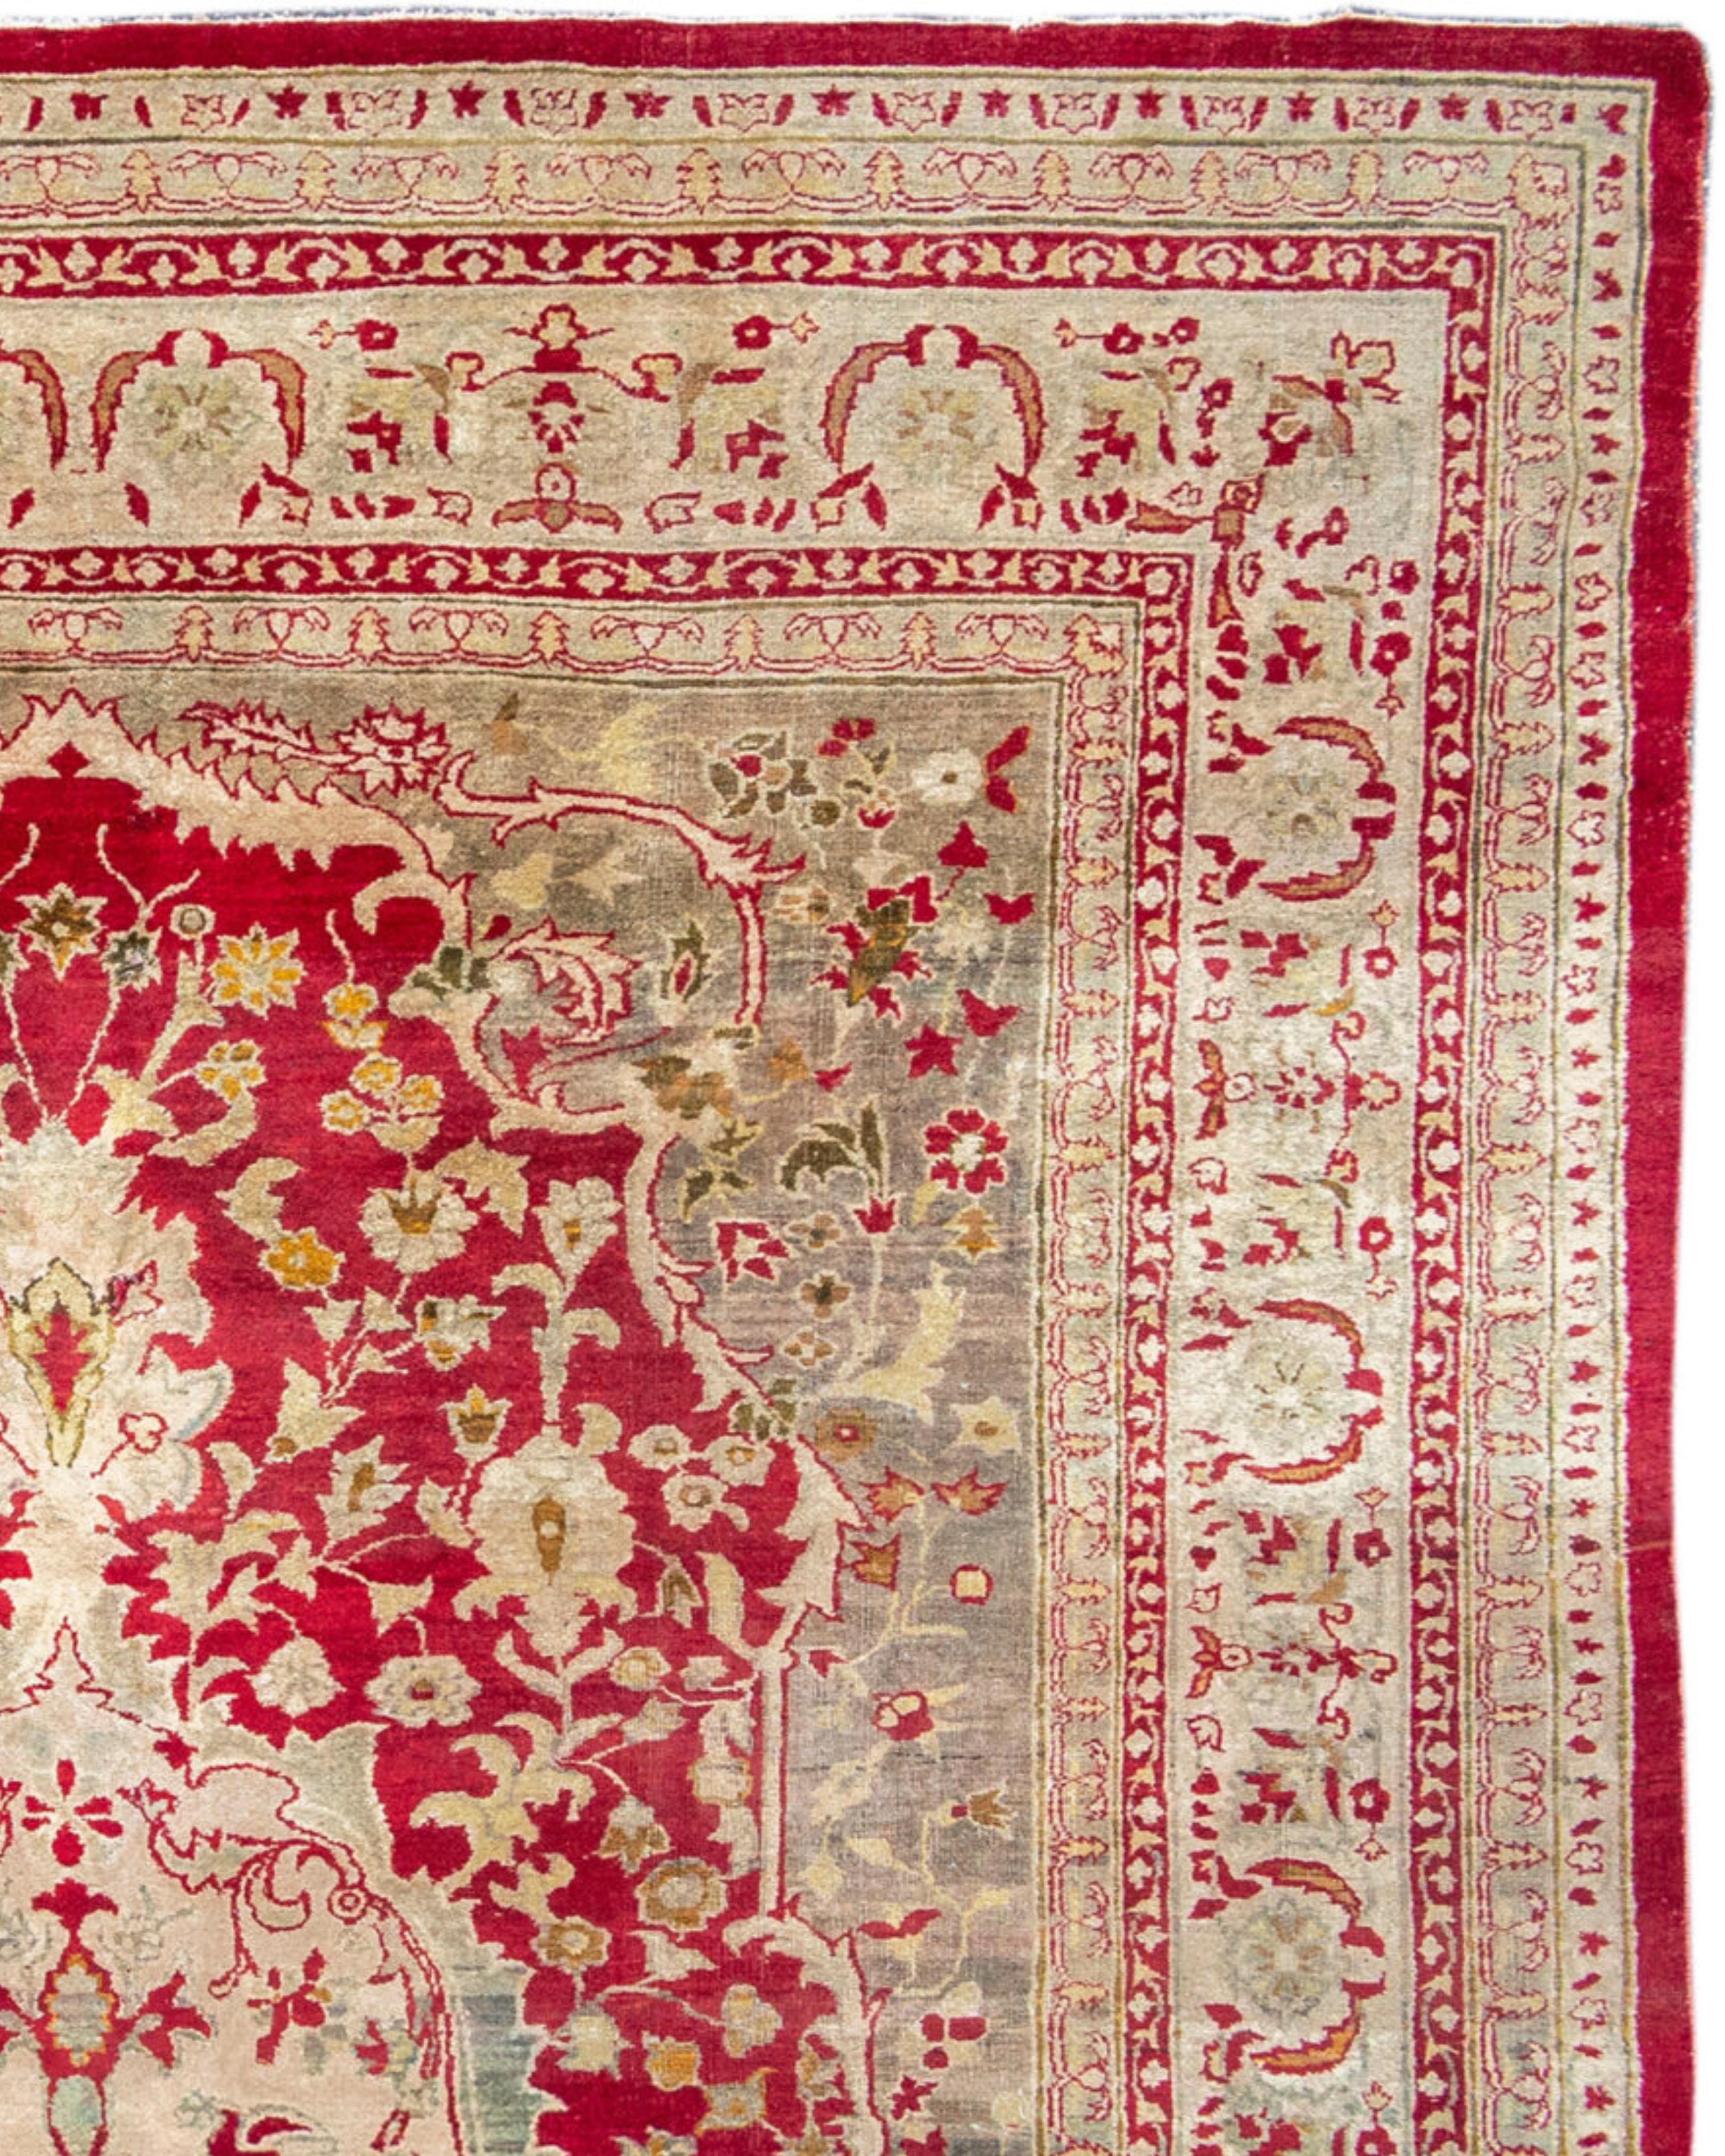 Wool Antique Red and Gold Indian Agra Carpet, Late 19th Century For Sale